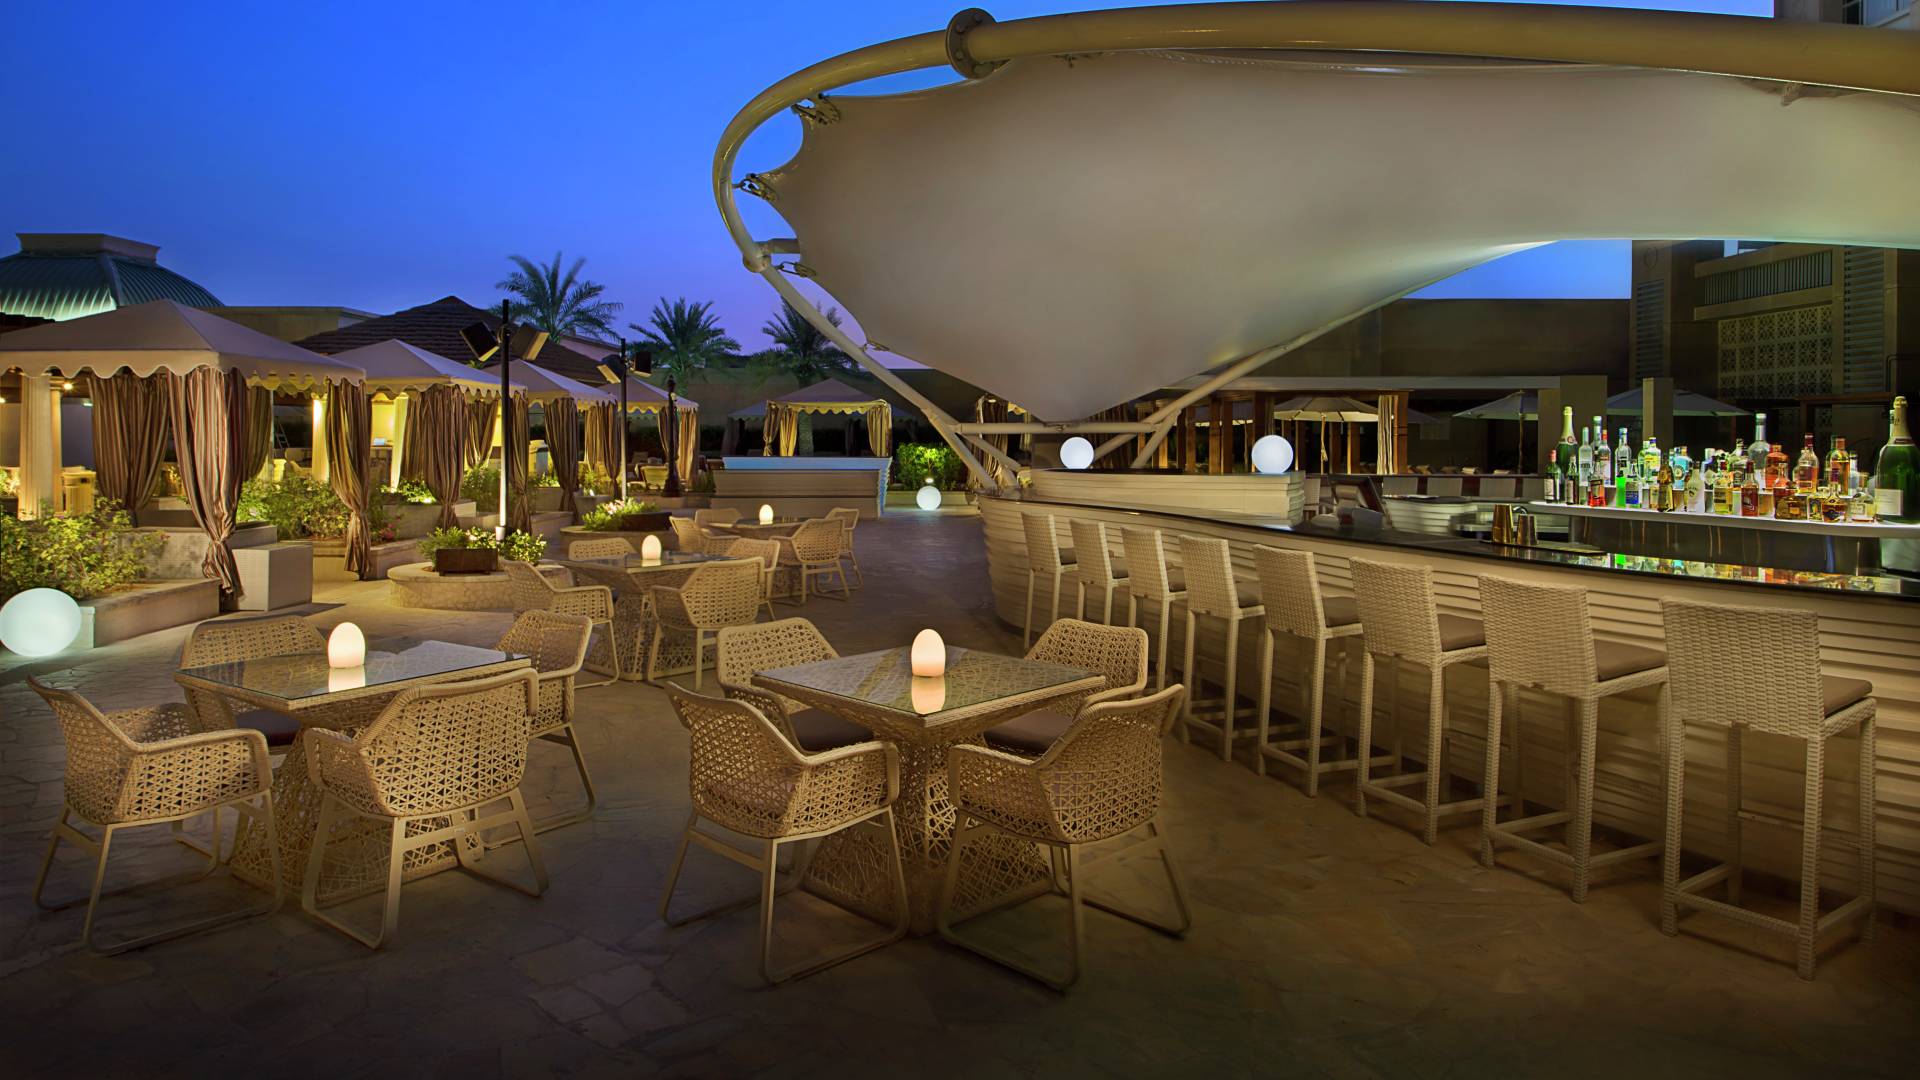 Firefly Poolside Restaurant Lounge Area and Bar at Dusk